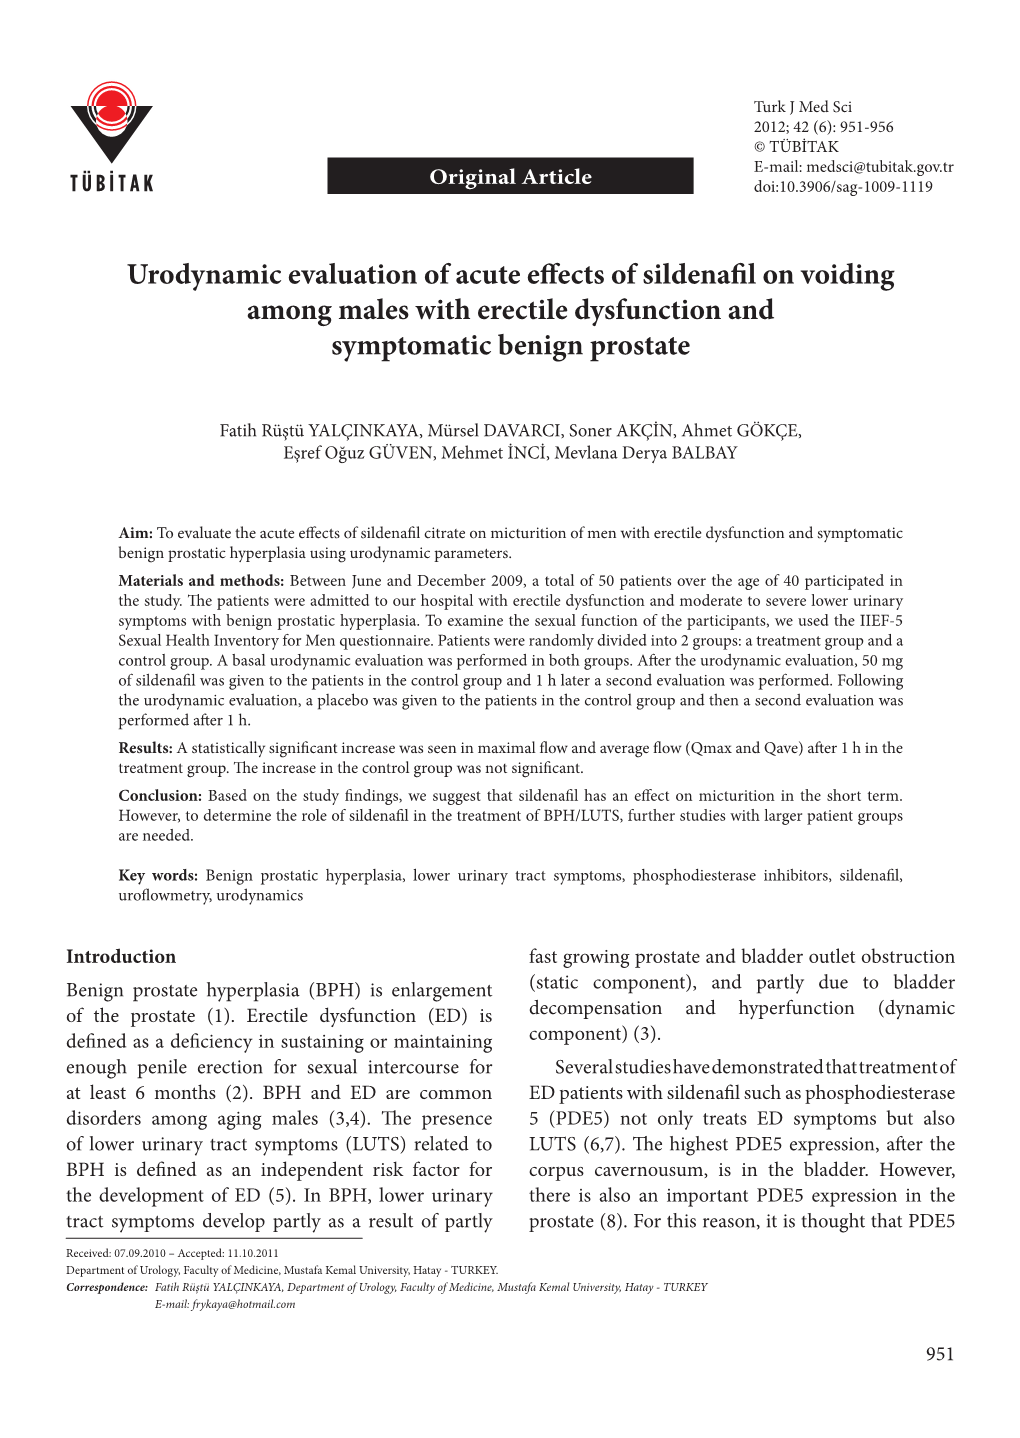 Urodynamic Evaluation of Acute Effects of Sildenafil on Voiding